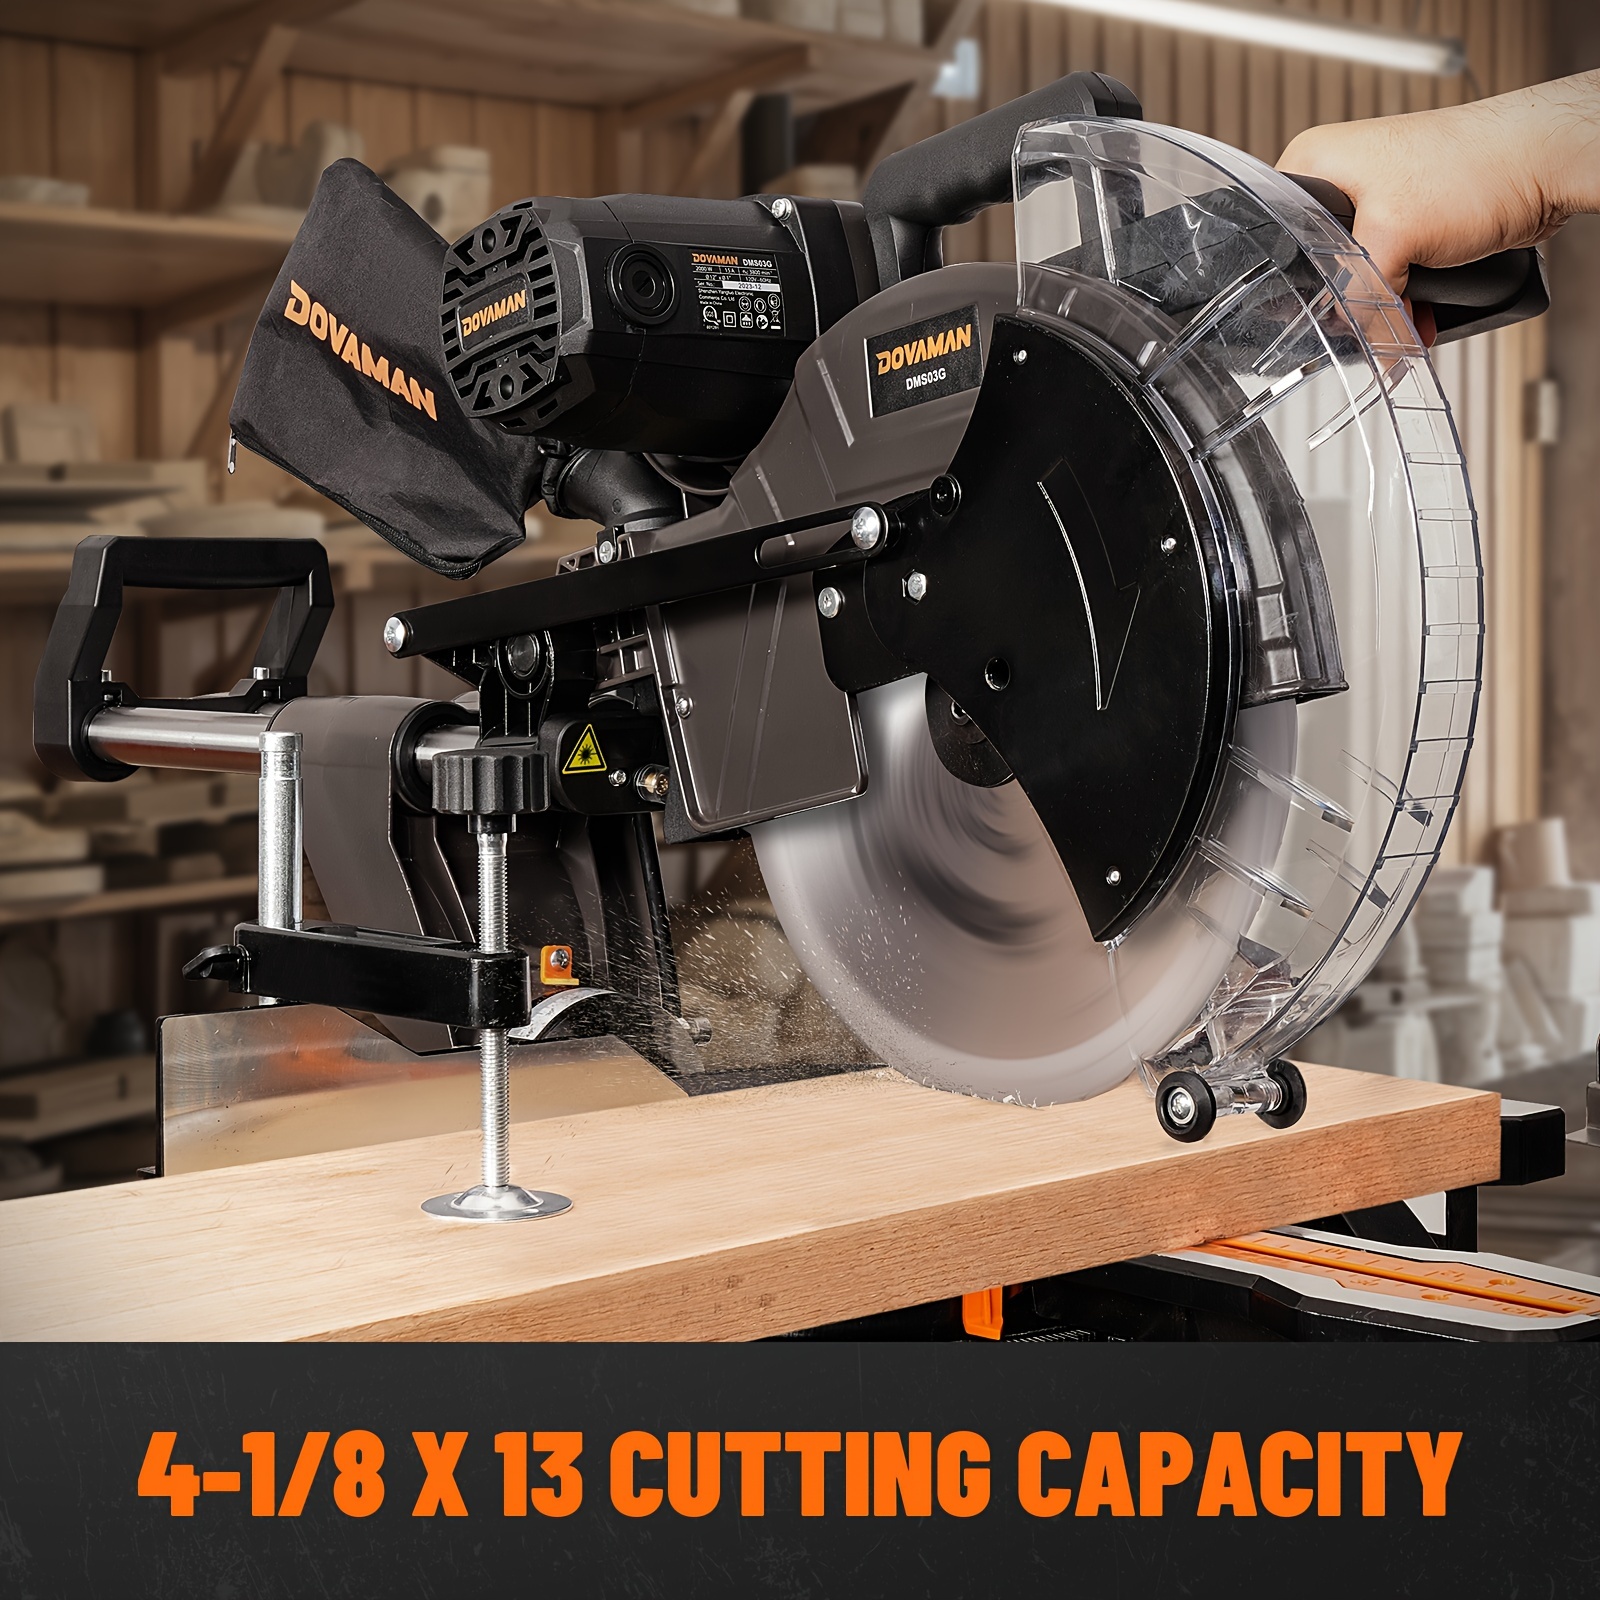 

12-inch Dual-bevel , Compund Sliding , Ambidextrous Operation, 3800rpm, 4.2 X 13in Cutting Capacity, Laser Guide, 0-45° Bevel & Miter Cut, 9 Positive Stops, 15-amp Corded